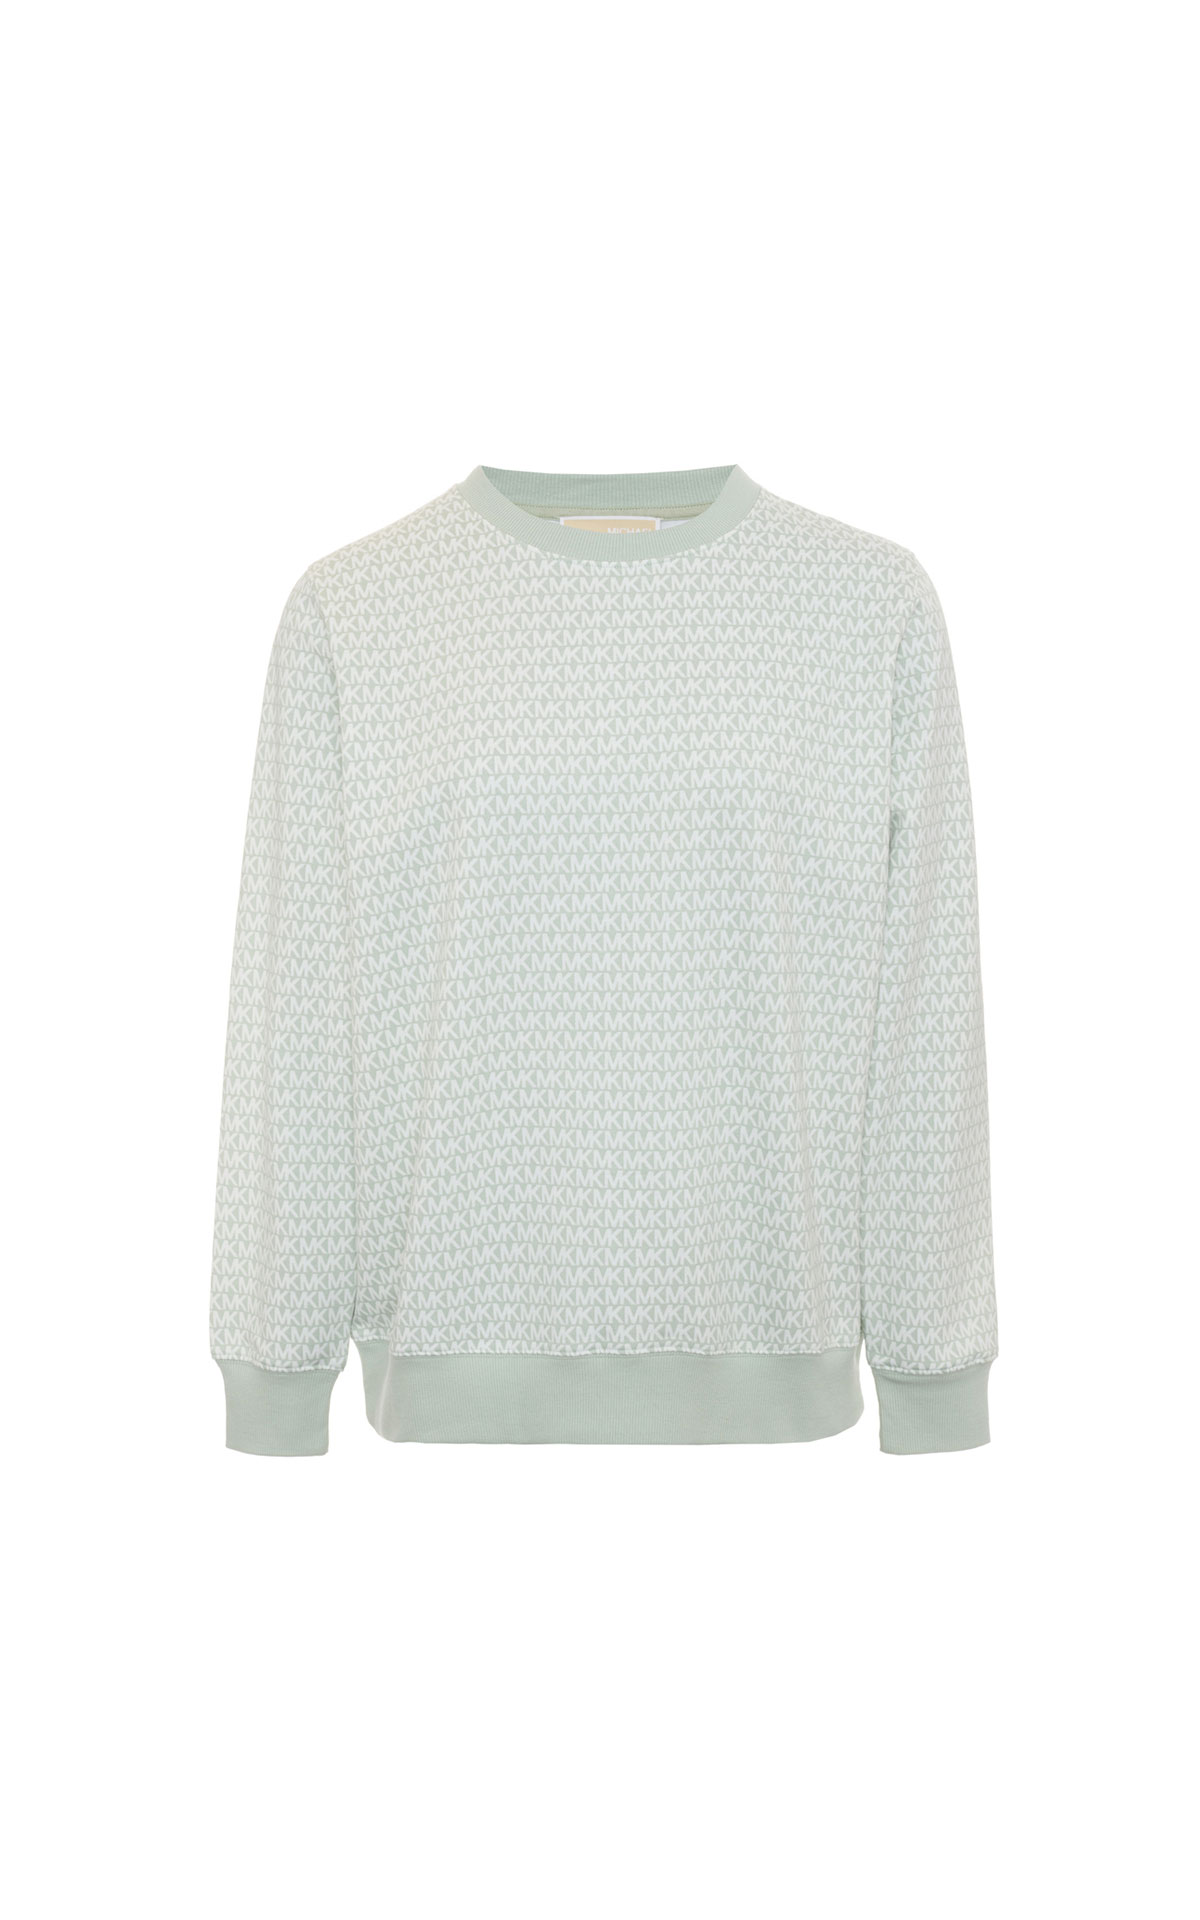 Michael Kors Allover logo knit top from Bicester Village